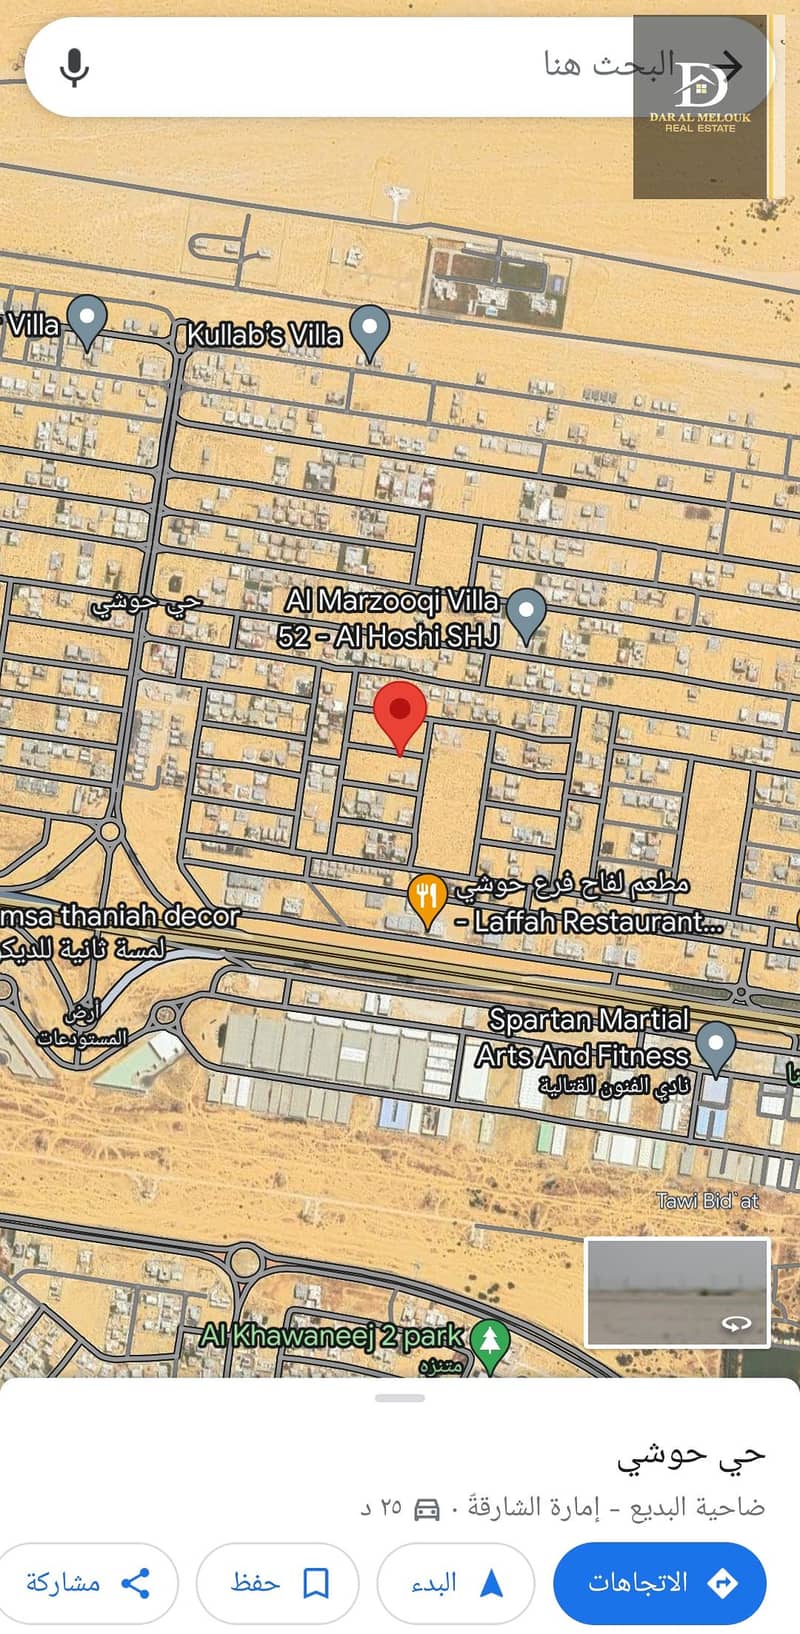 For sale in Sharjah, Al-Hoshi area, residential land, area of ​​10,000 feet, a permit for a ground and first villa, and two attached villas are declared. The land is ready for construction, directly, the second piece of the garden, close to the mosque, cl